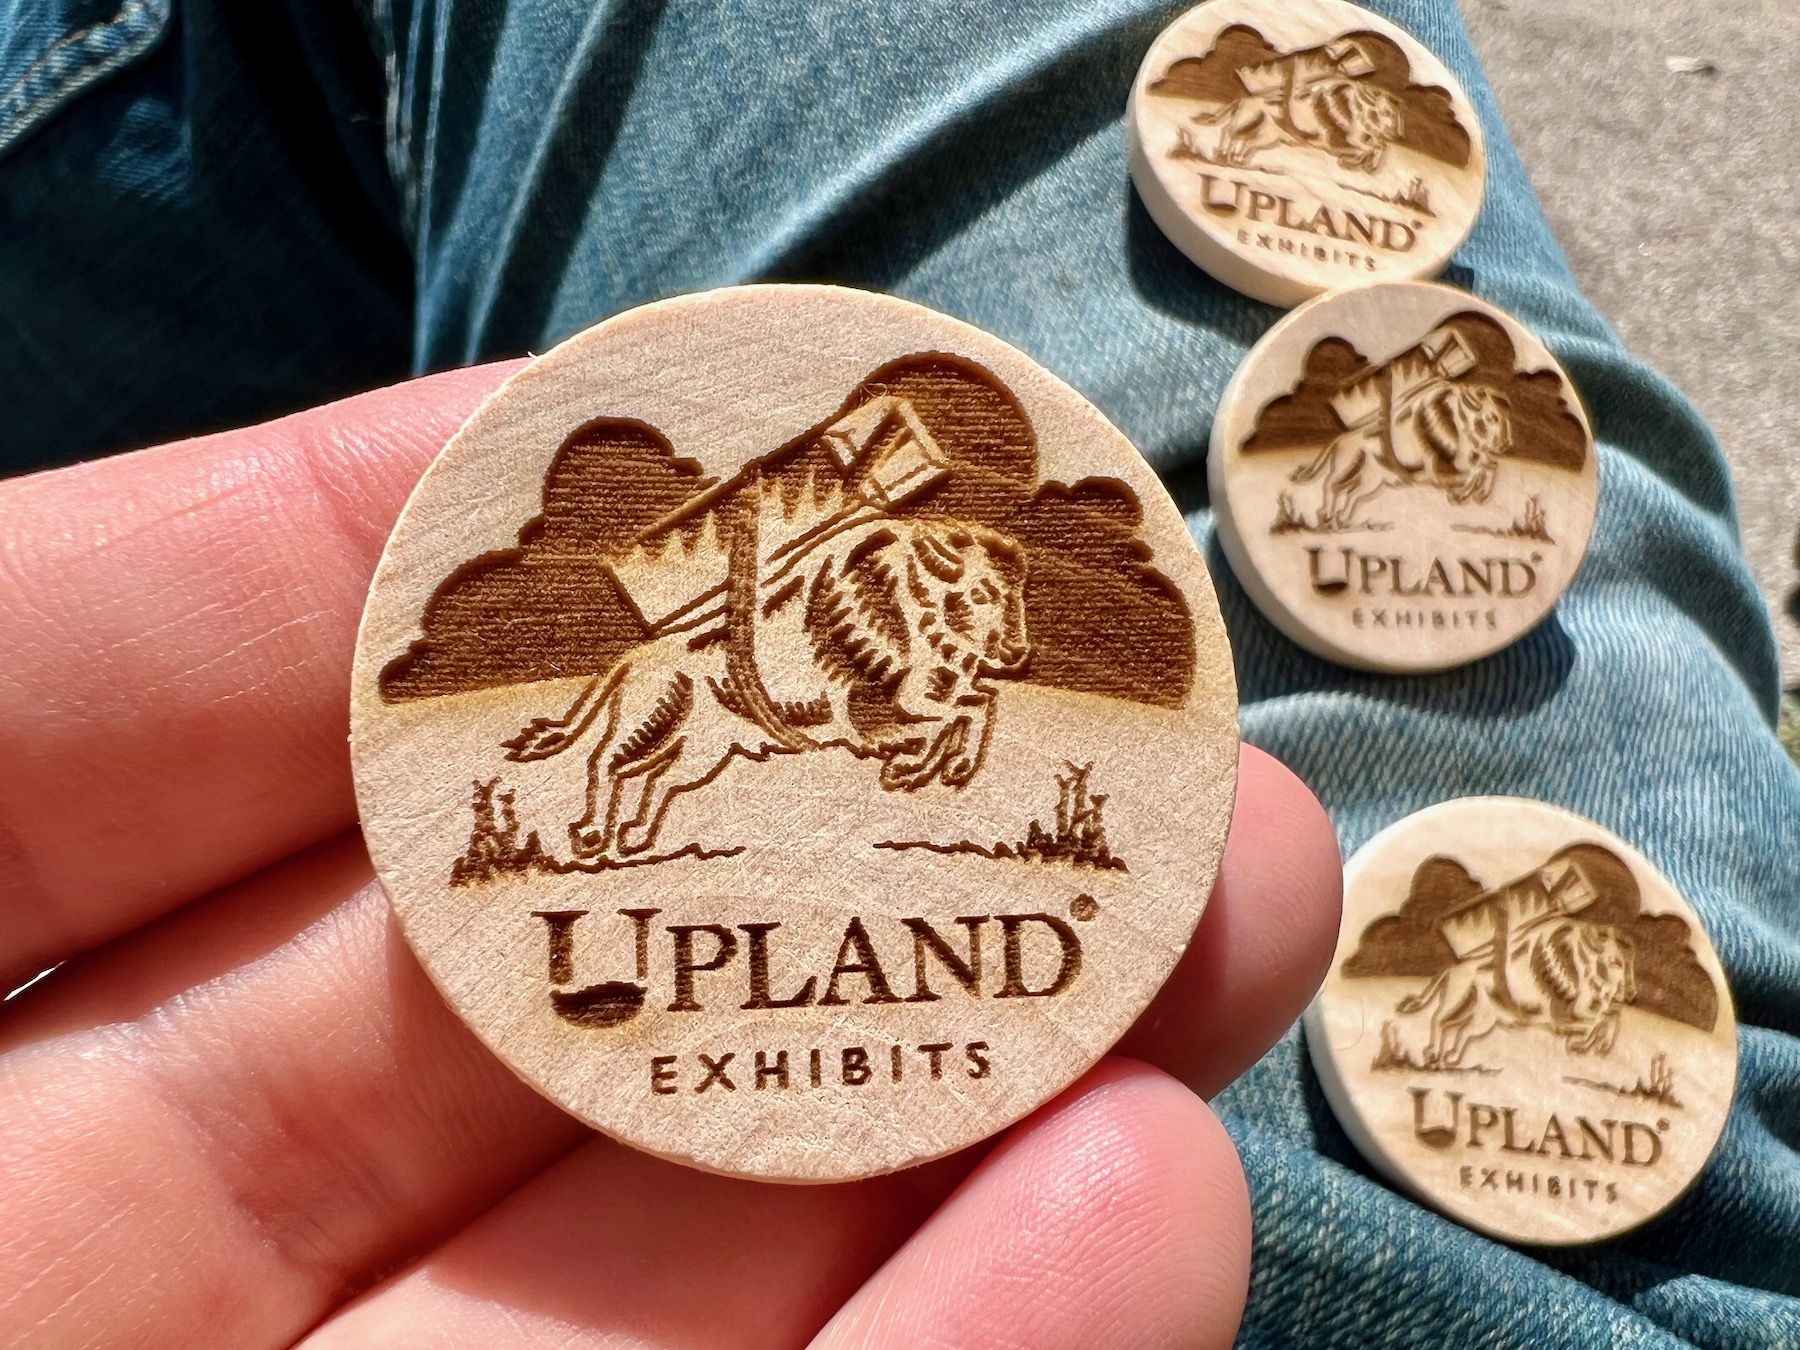 Upland coins